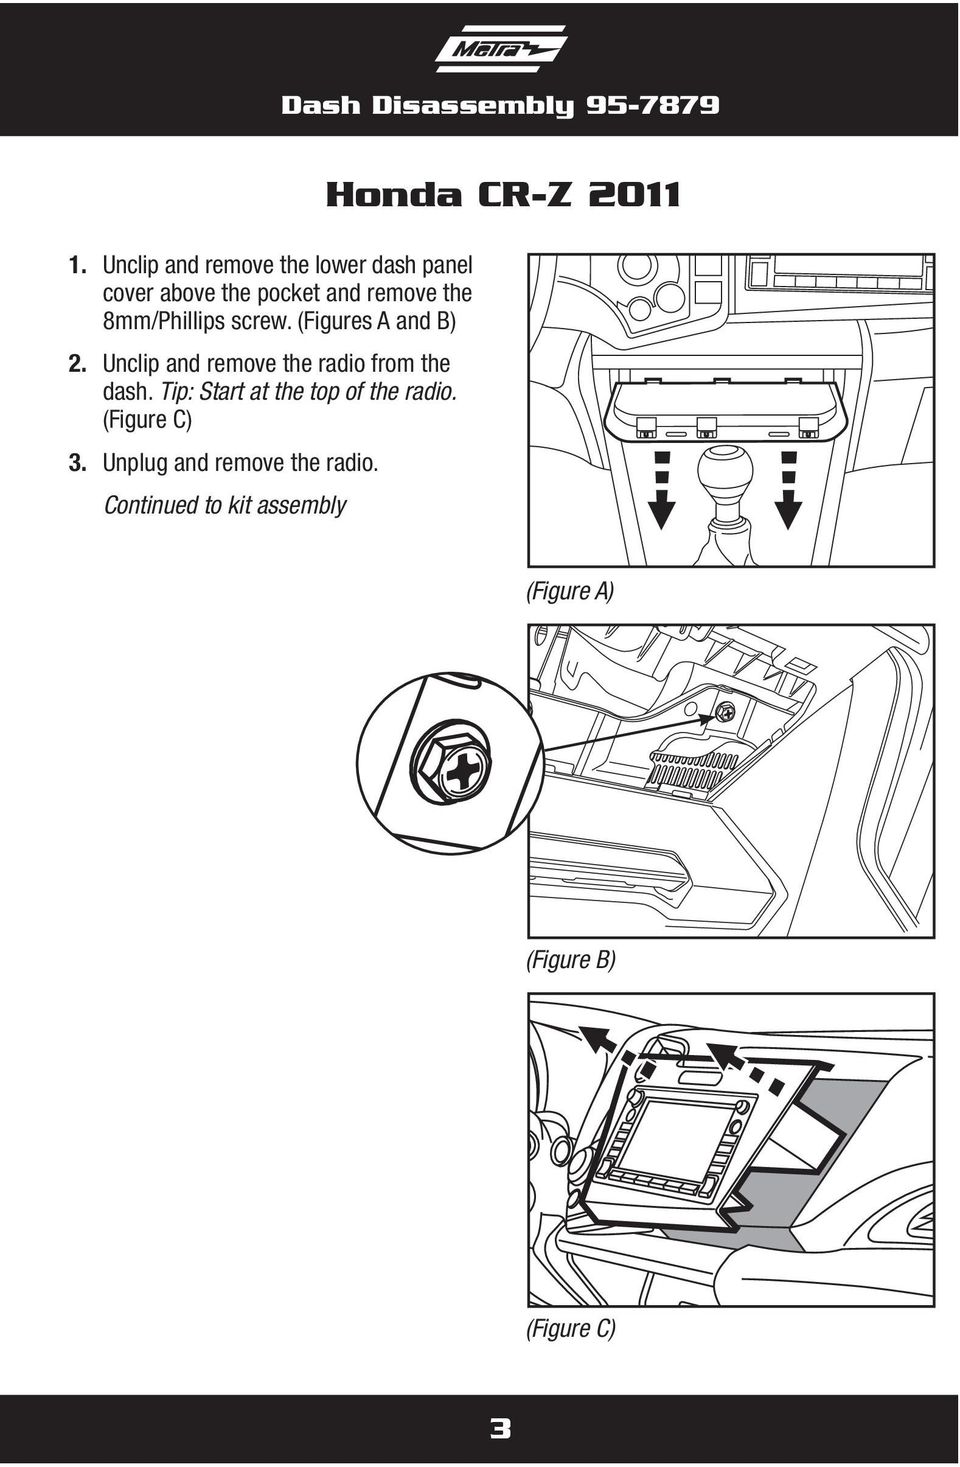 8mm/Phillips screw. (Figures A and B) 2. Unclip and remove the radio from the dash.